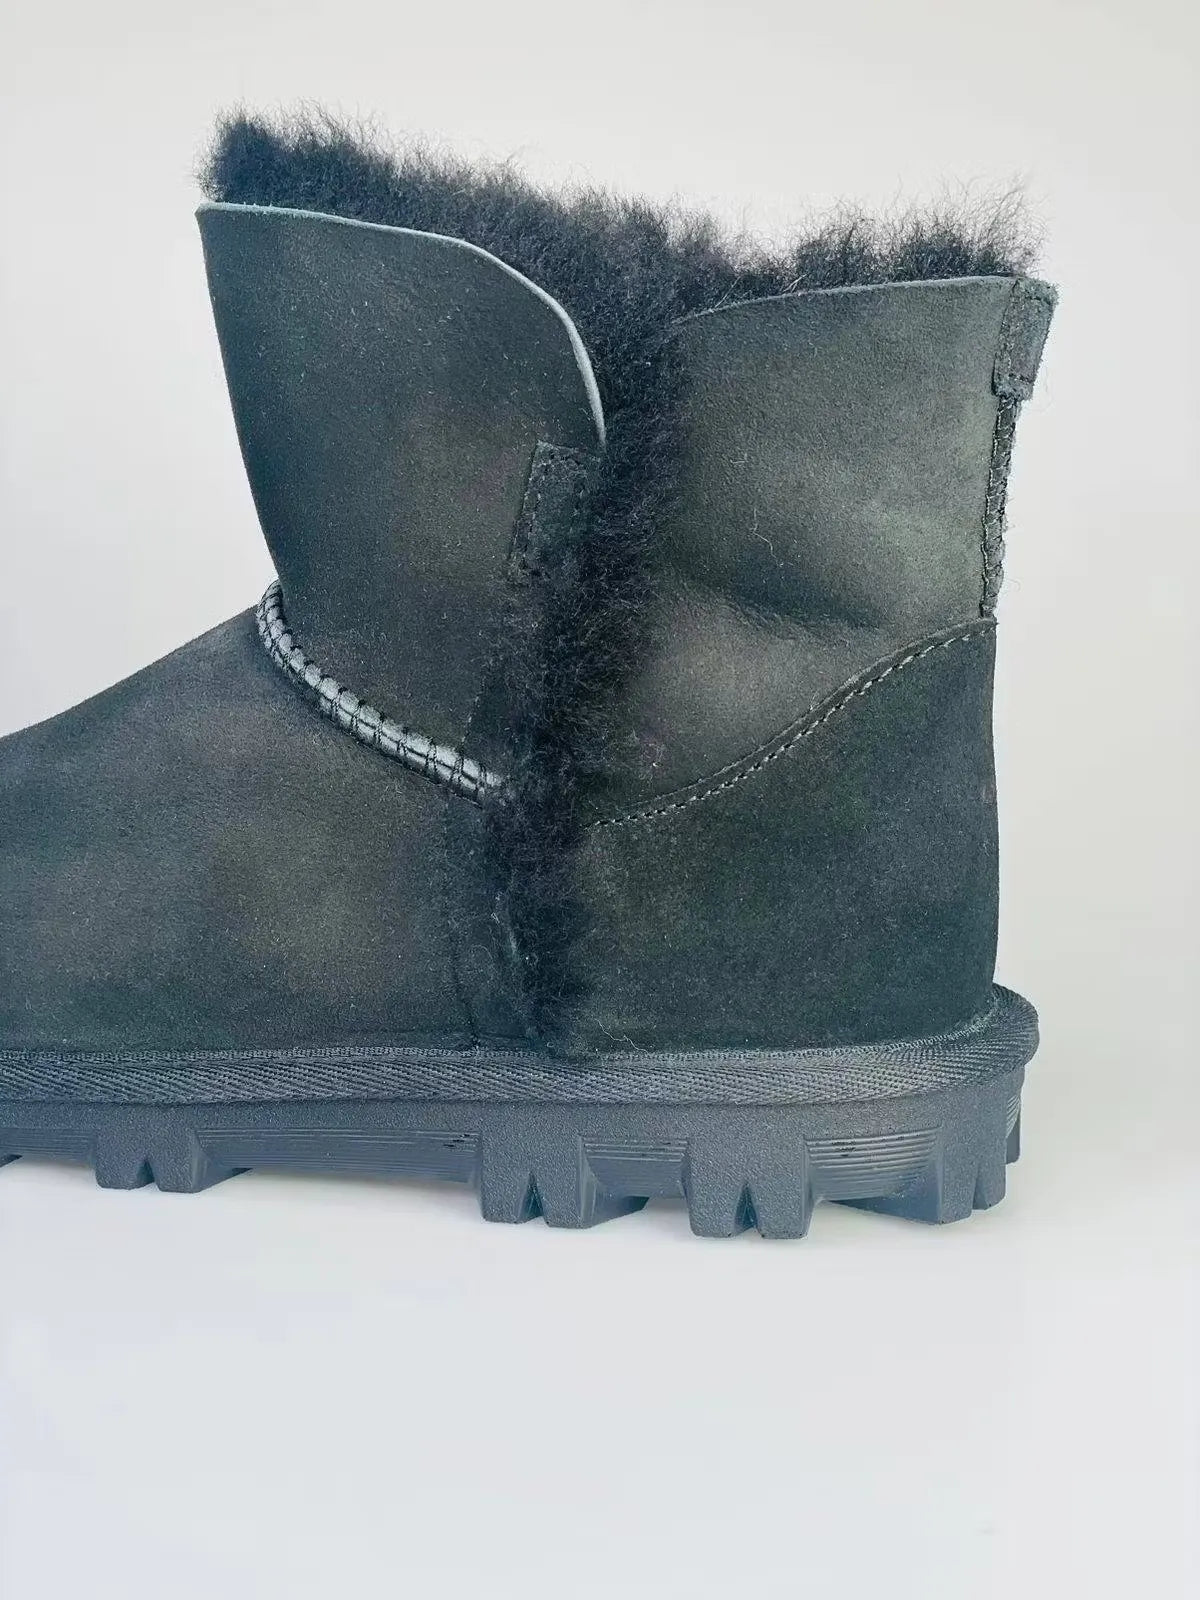 Cozy up in style with Kirkland Signature Ladies' Shearling Boots! These black boots feature a warm, fluffy lining for ultimate comfort. Shop on Dubailisit!